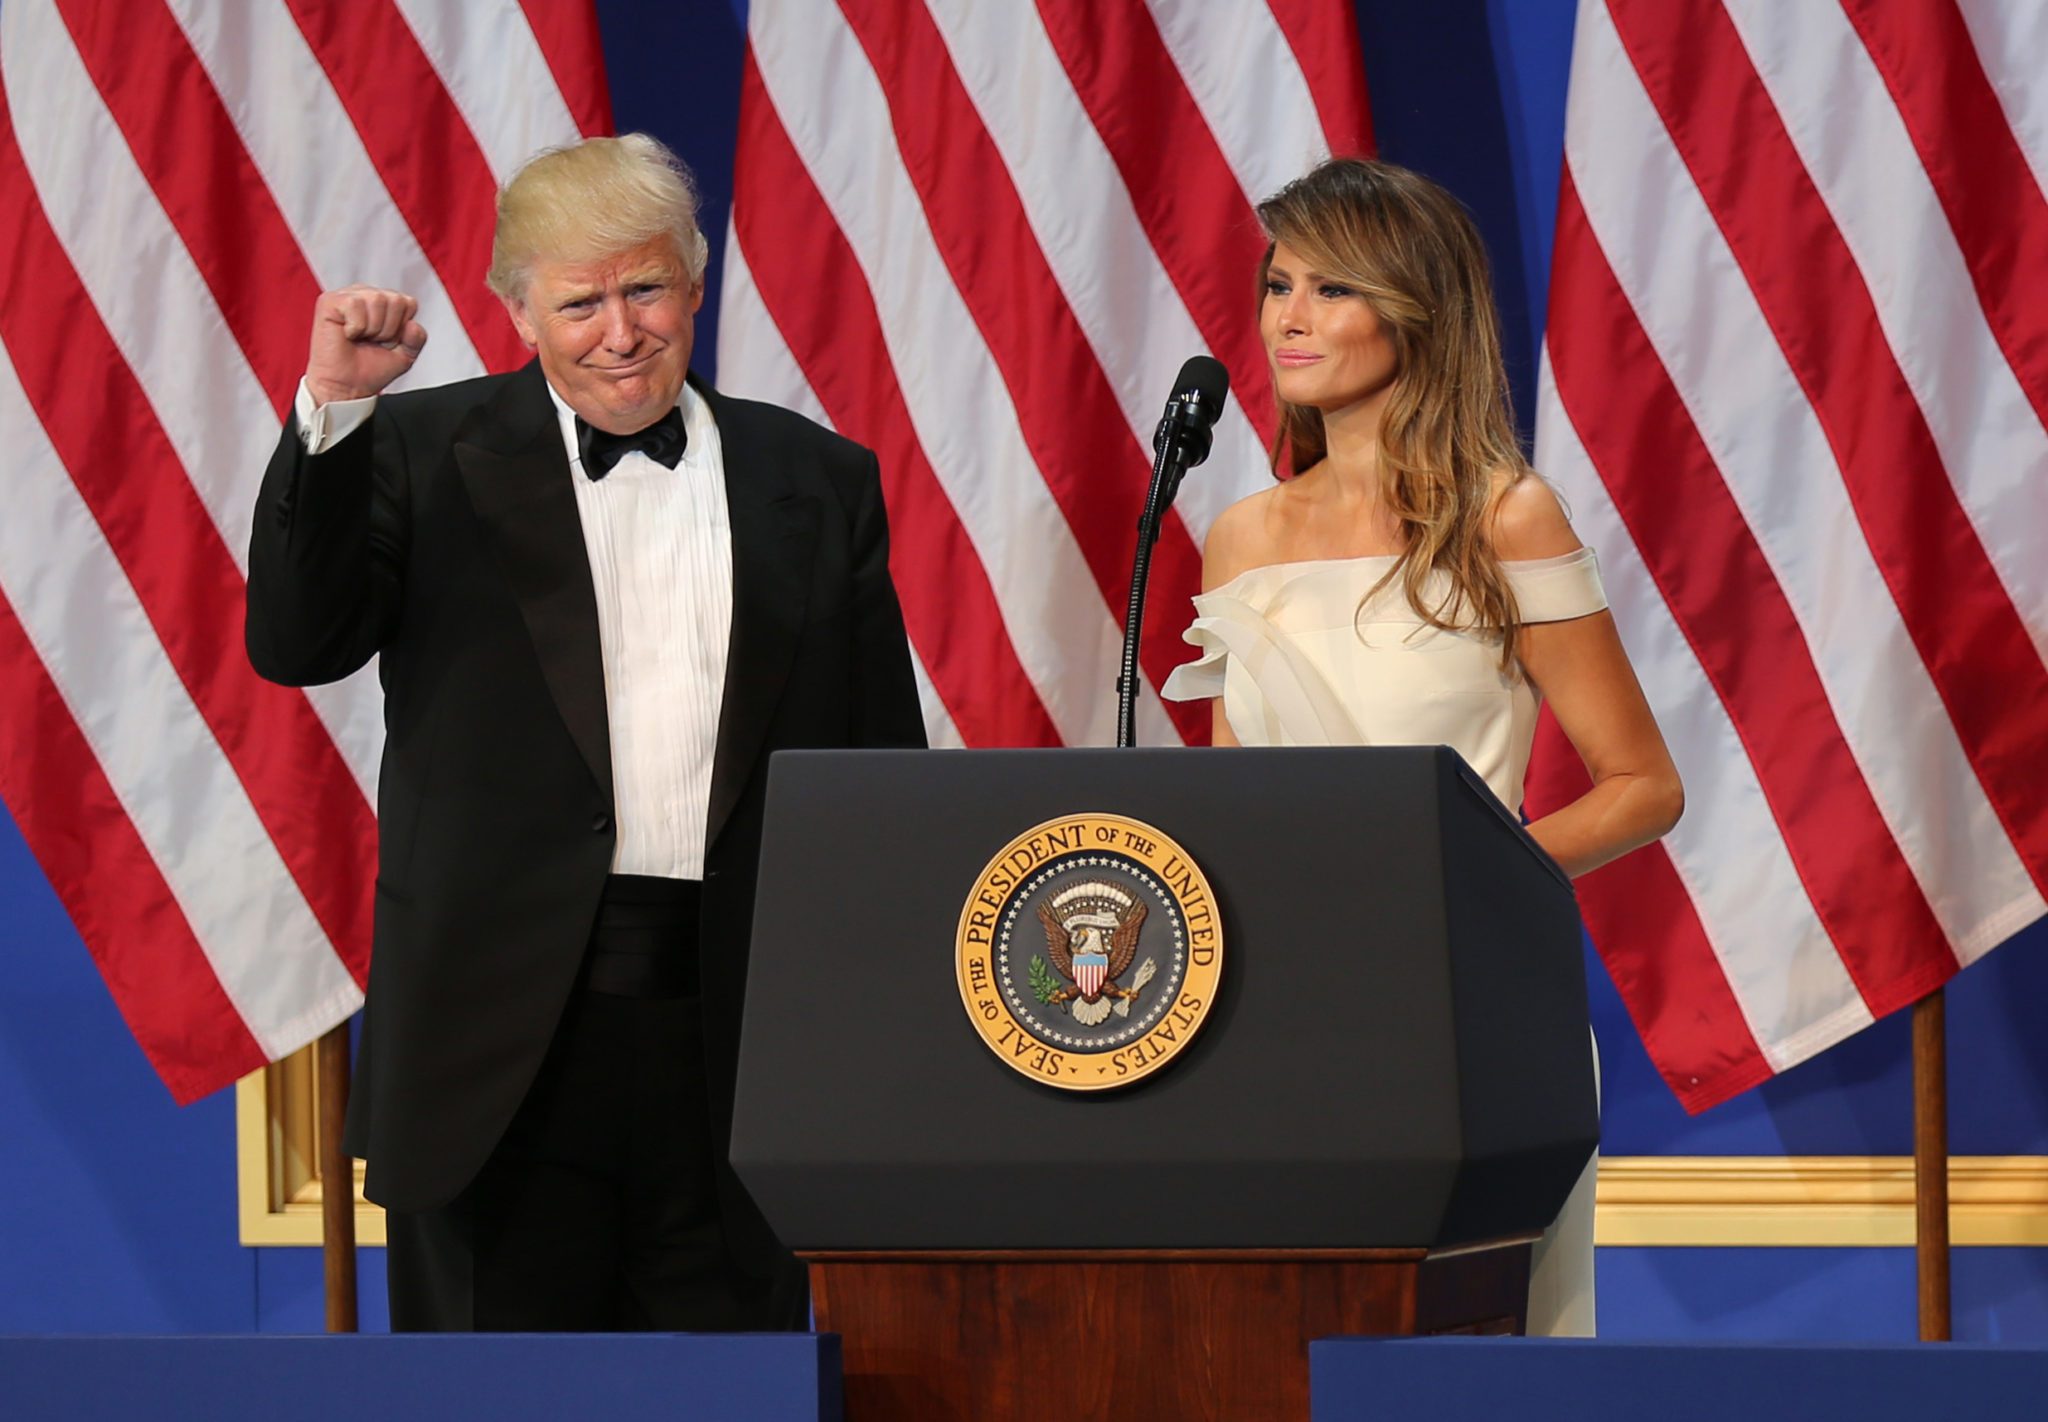 President Donald J. Trump celebrates the First Lady Melania Trump's speech at the Salute to Our Armed Services Ball at the National Building Museum, Washington, D.C., Jan. 20, 2017. The event, one of three official balls held in celebration of the 58th Presidential Inauguration, paid tribute to members of all branches of the armed forces of the United States, as well as first responders and emergency personnel. (DoD photo by U.S. Army Sgt. Kalie Jones)